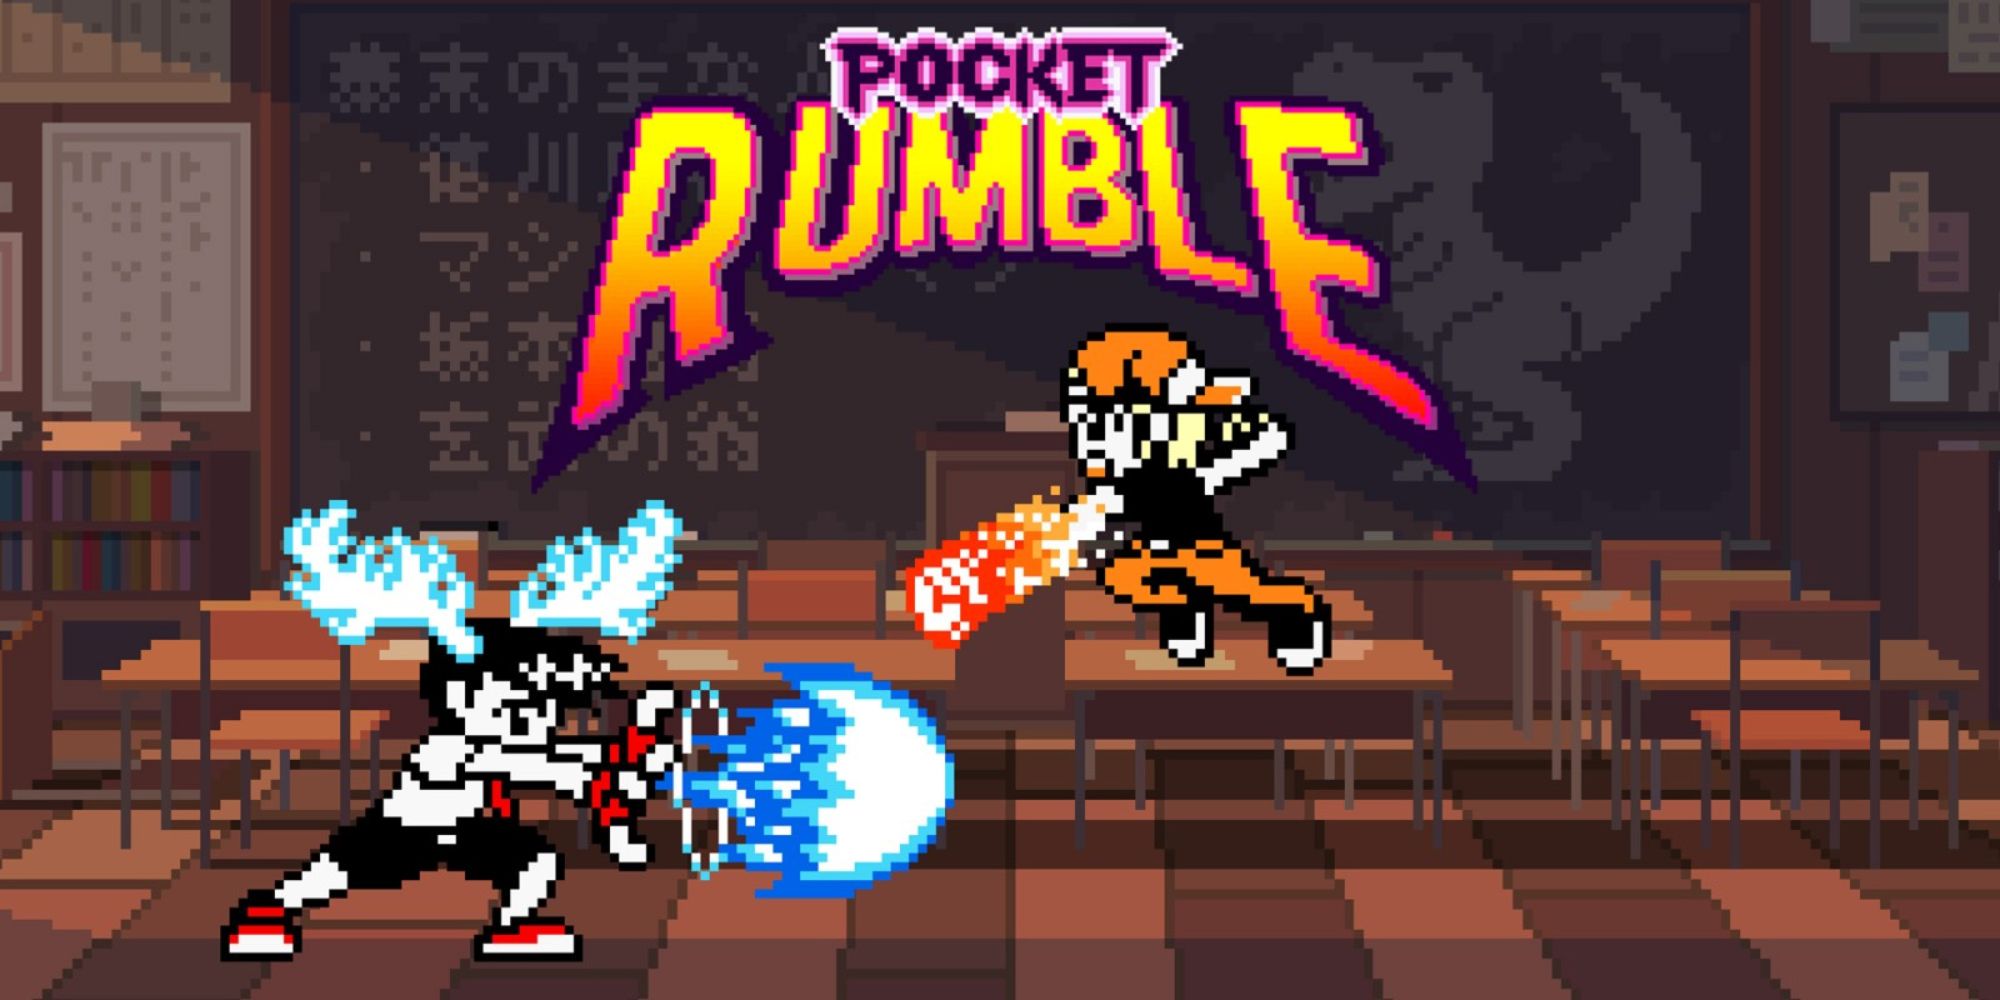 a promotional image for the game Pocket Rumble featuring two of its characters fighting each other in a classroom with the game's title above them